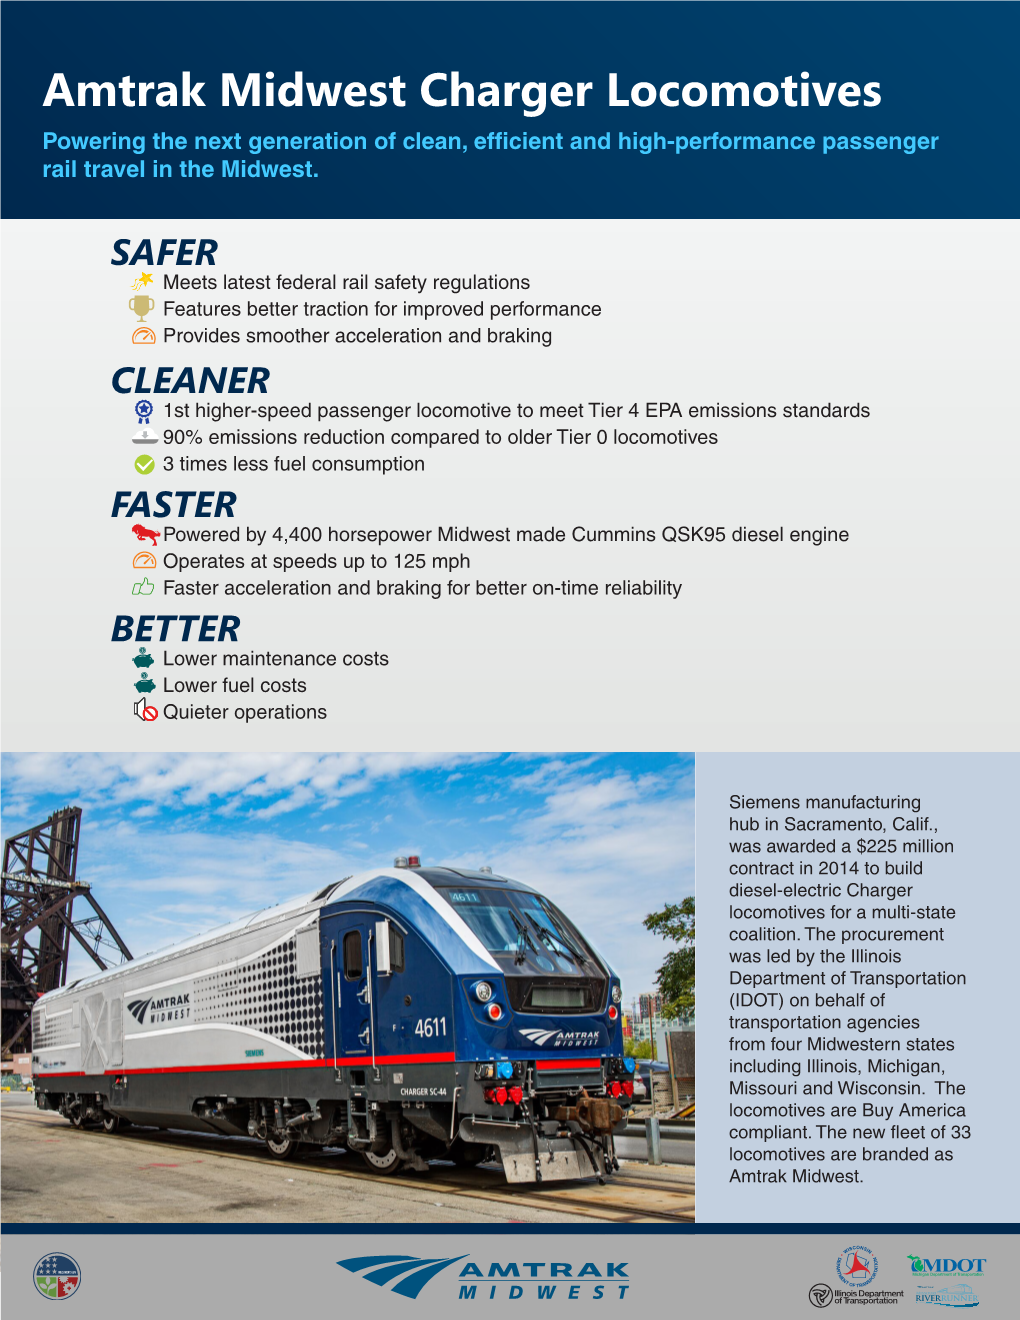 Amtrak Midwest Charger Locomotives Powering the Next Generation of Clean, Efficient and High-Performance Passenger Rail Travel in the Midwest